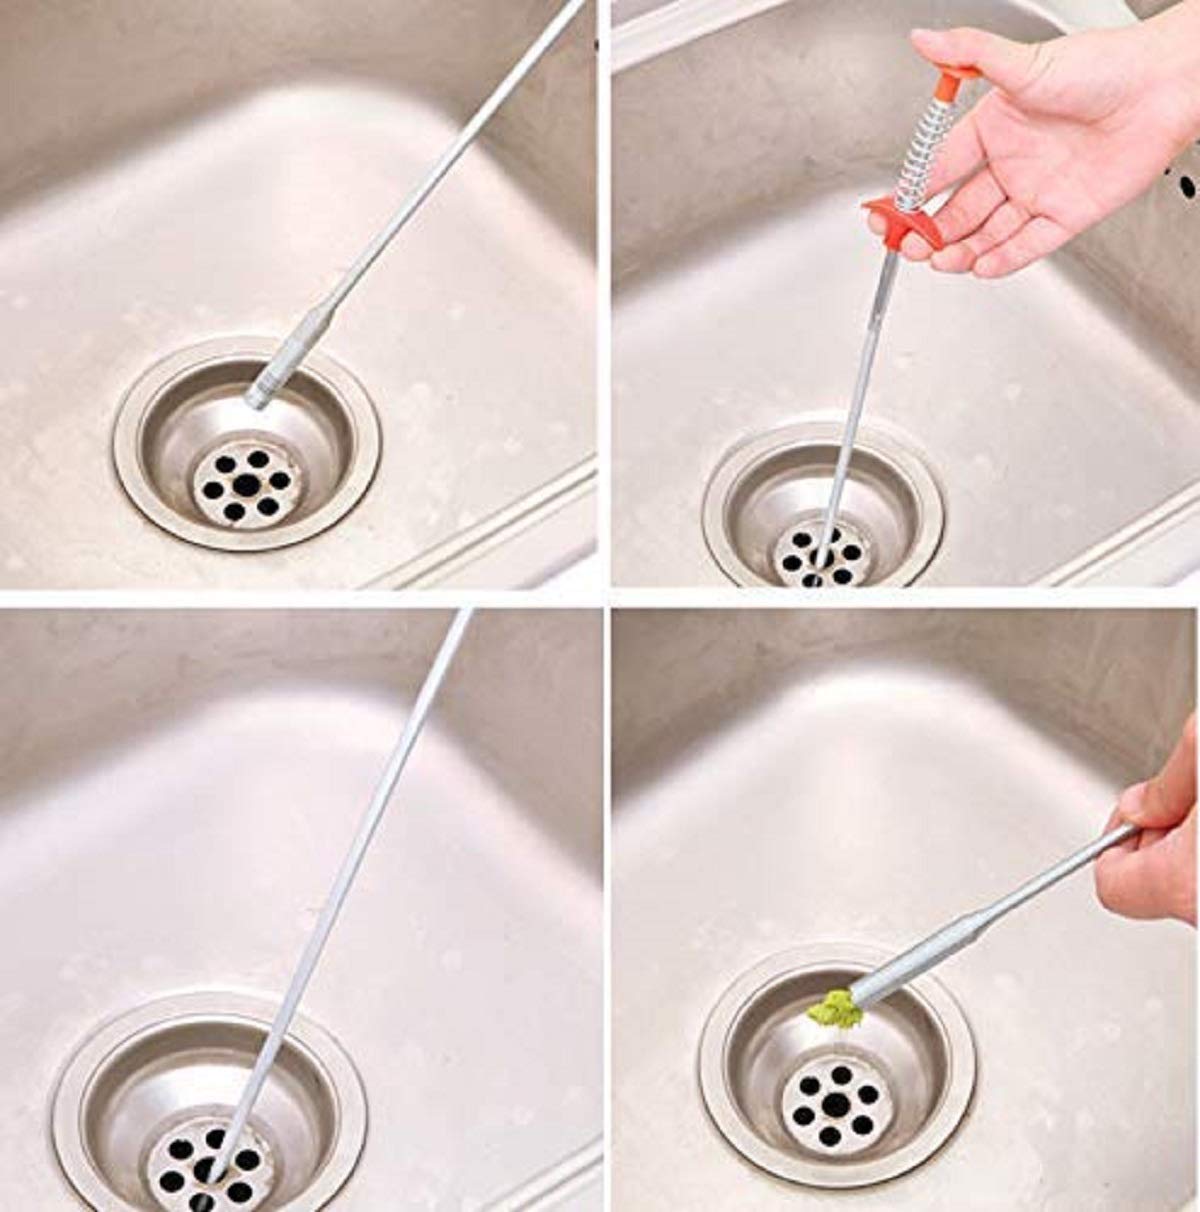 Sink Drain cleaner - Stainless Steel Hair Catching Drain Cleaner Wire